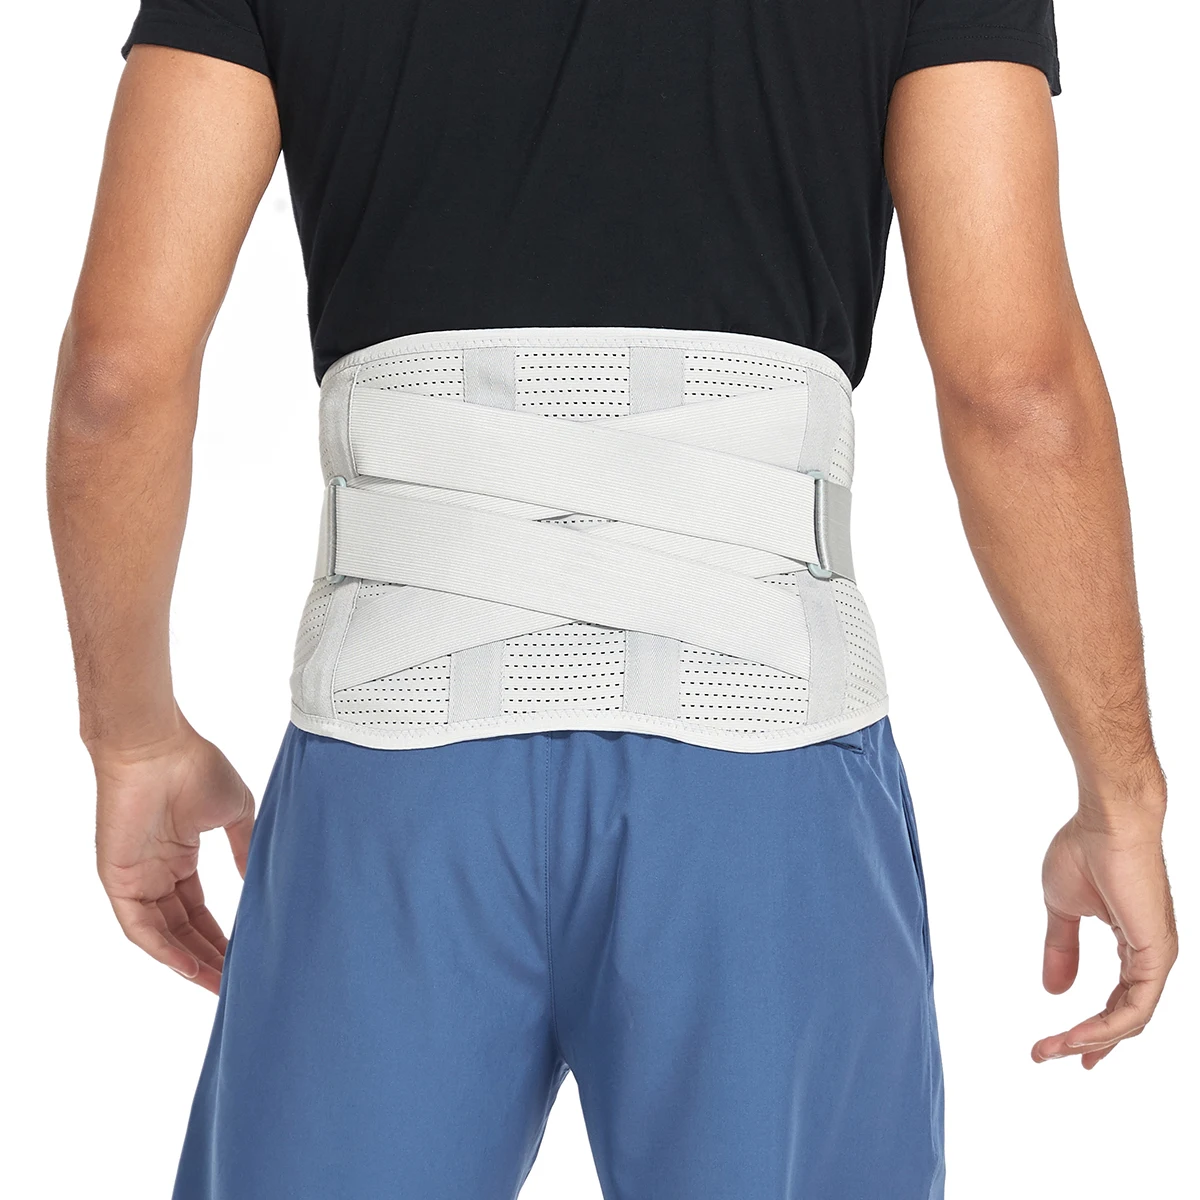 Back Brace for Men Breathable Waist Shapers Lumbar Lower Back Support Belt Herniated Disc Back Pain Relief Heavy Lifting decompression lumbar back belt waist band lower back support brace disc protrude spine orthopedic pain relief self heatin